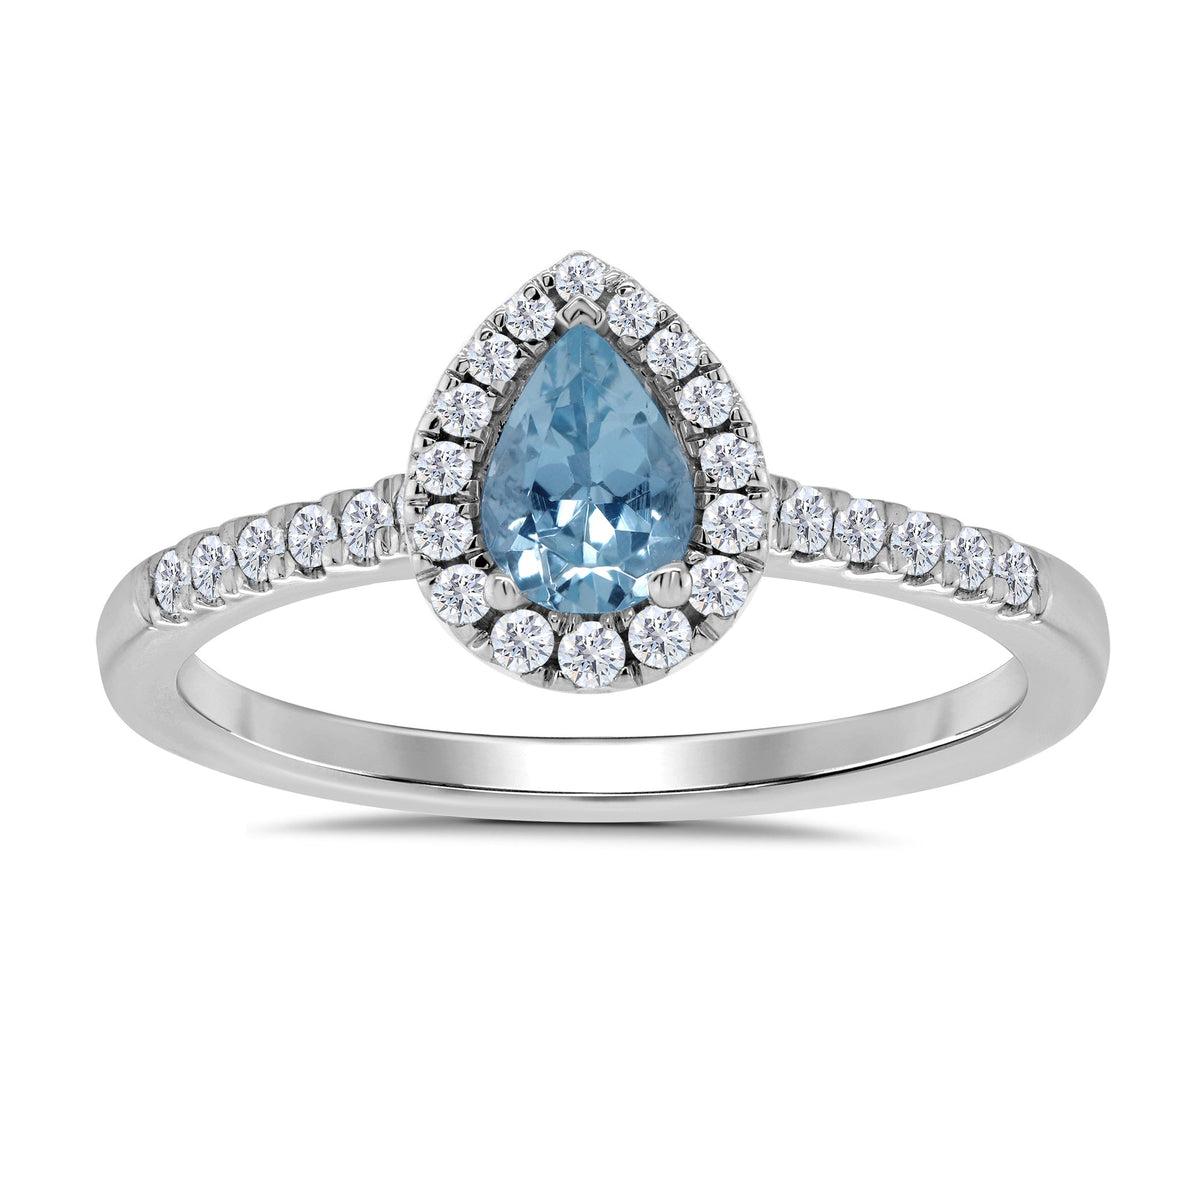 9ct white gold 6x4mm pear shape aquamarine &amp; diamond cluster ring with diamond shoulders 0.20ct